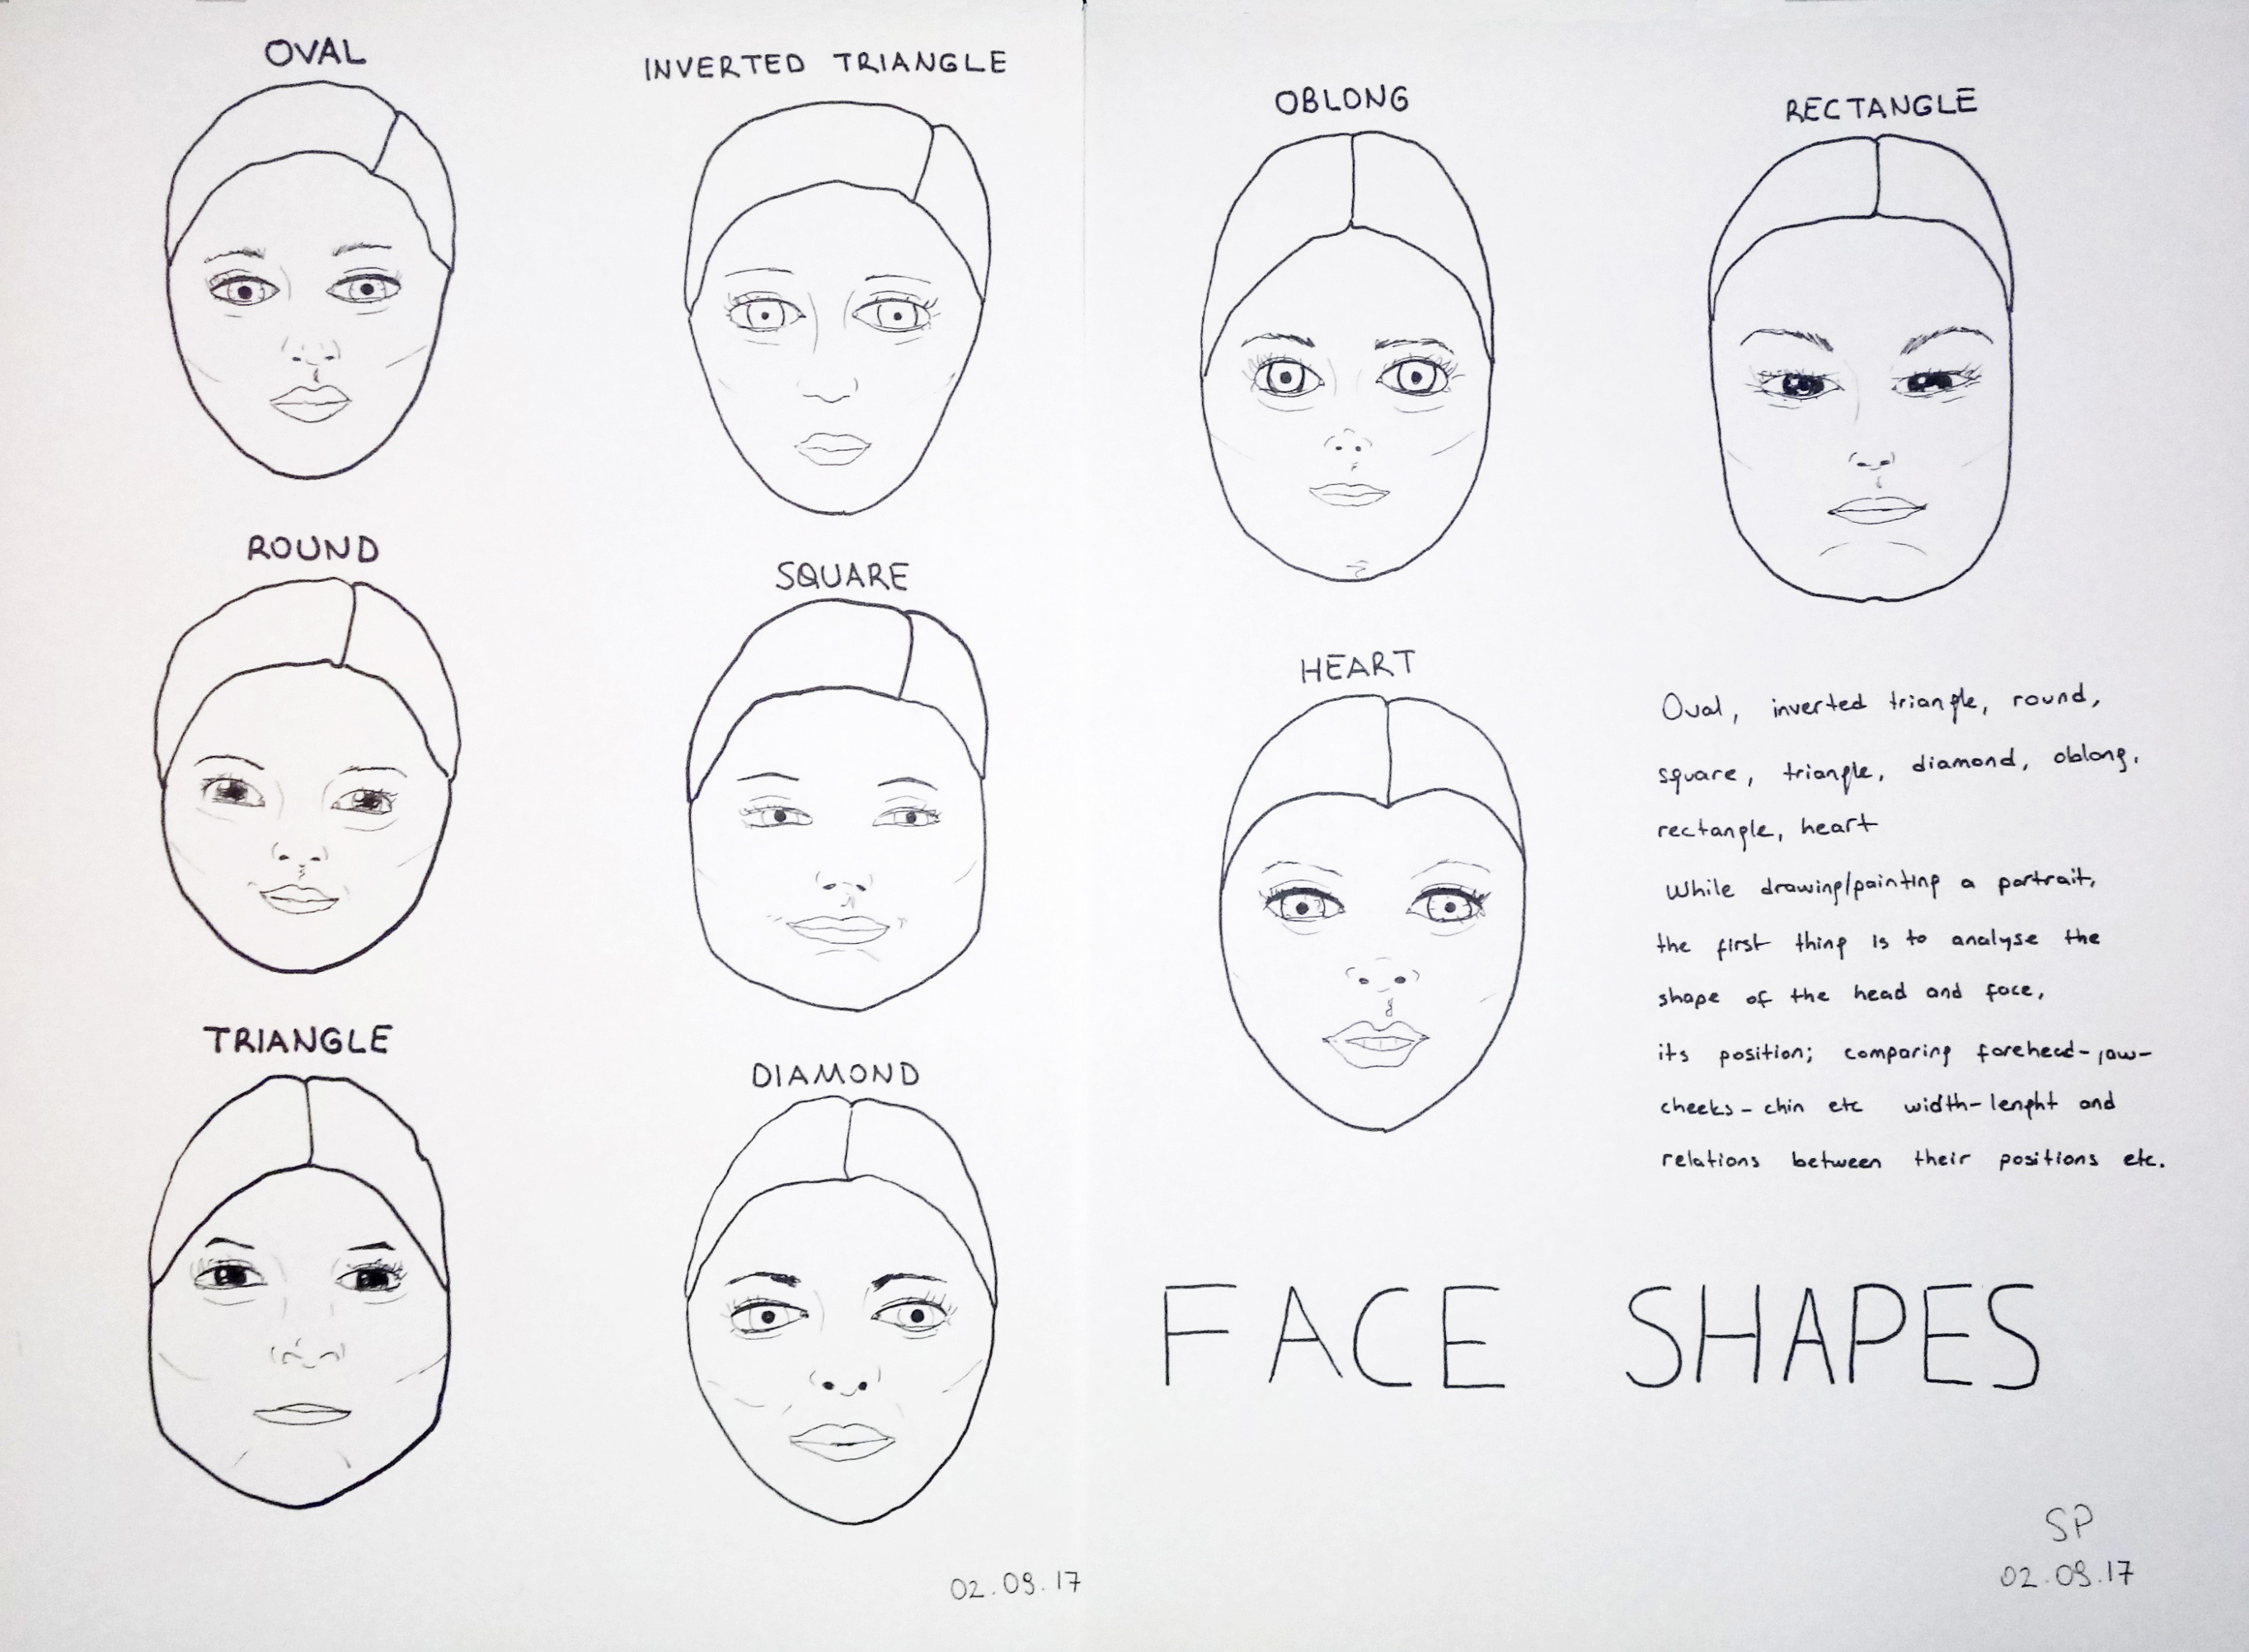 How To Draw Face Shape Howto Techno Step 1 draw round shape for the face and give the outlines as shown. how to draw face shape howto techno